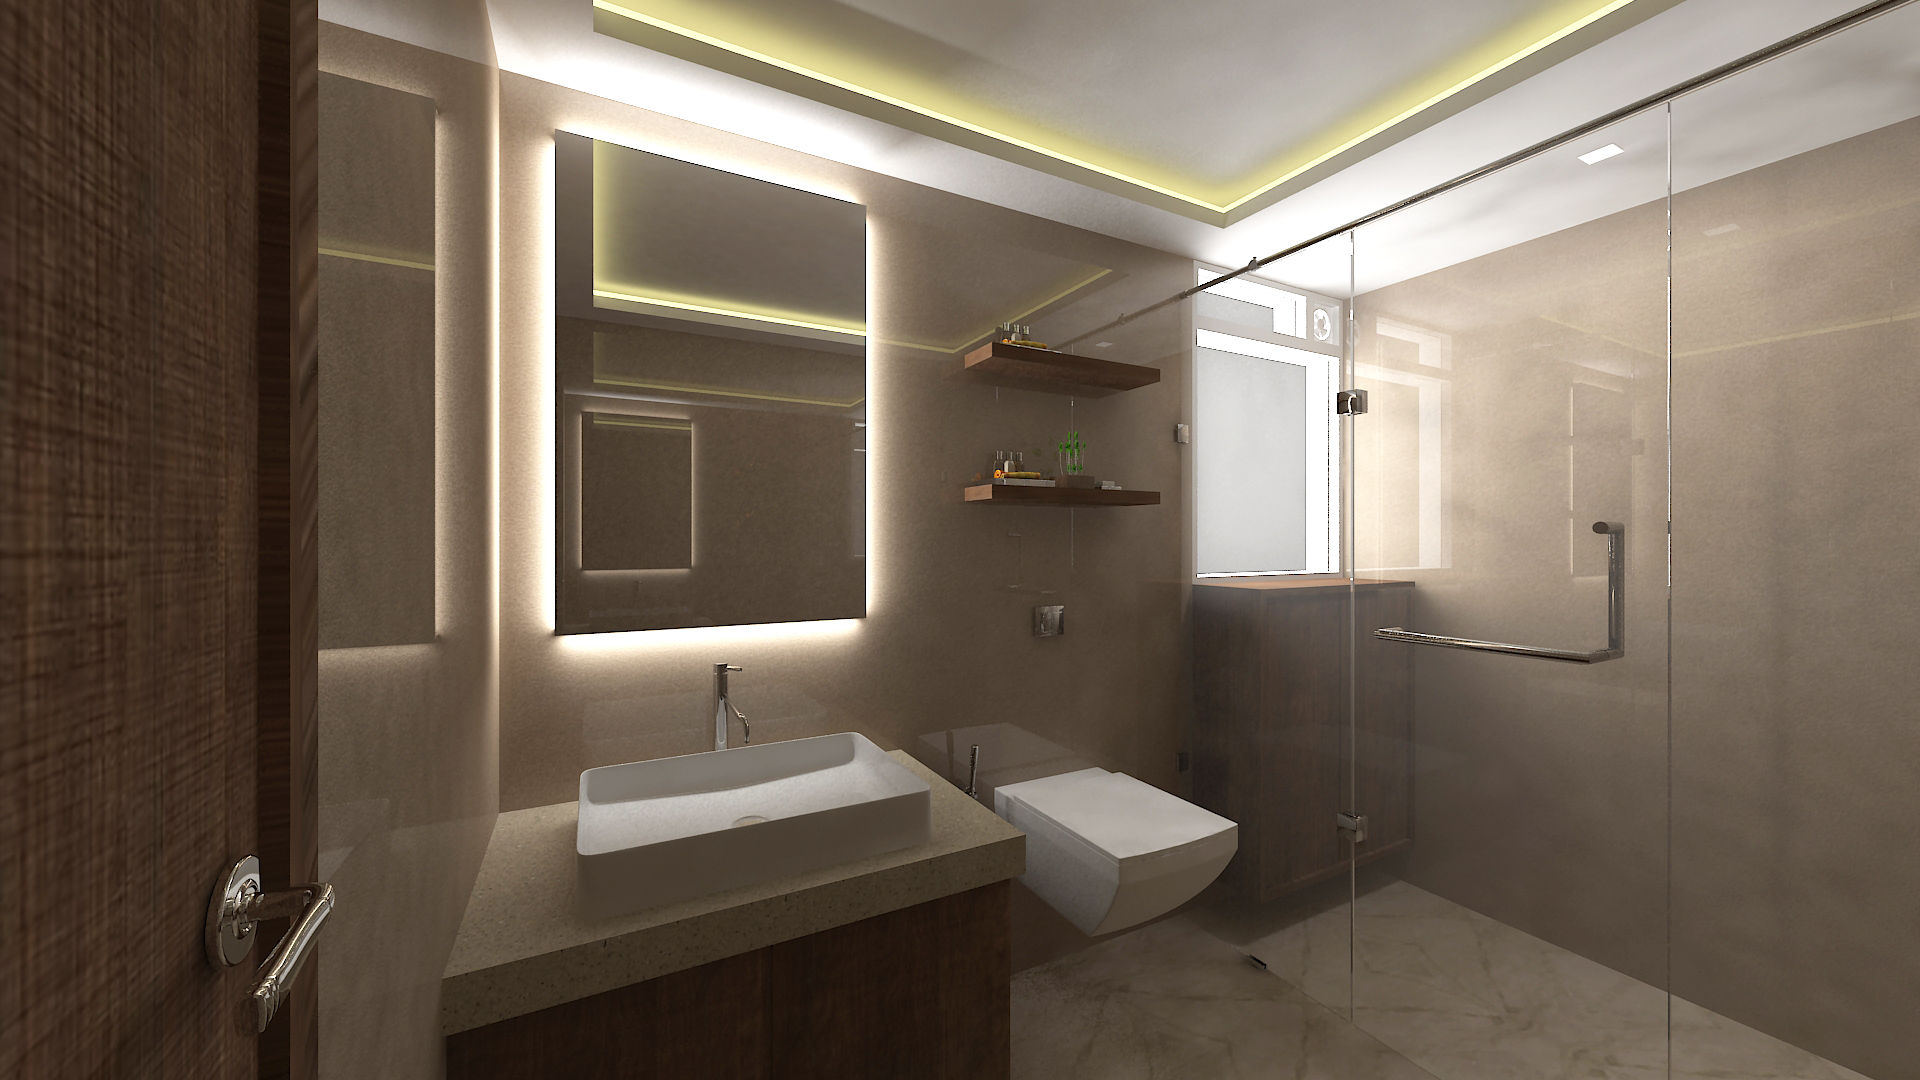 3bhk residence, Nerul Sector 27, SPACE DESIGN STUDIOS SPACE DESIGN STUDIOS Nowoczesna łazienka